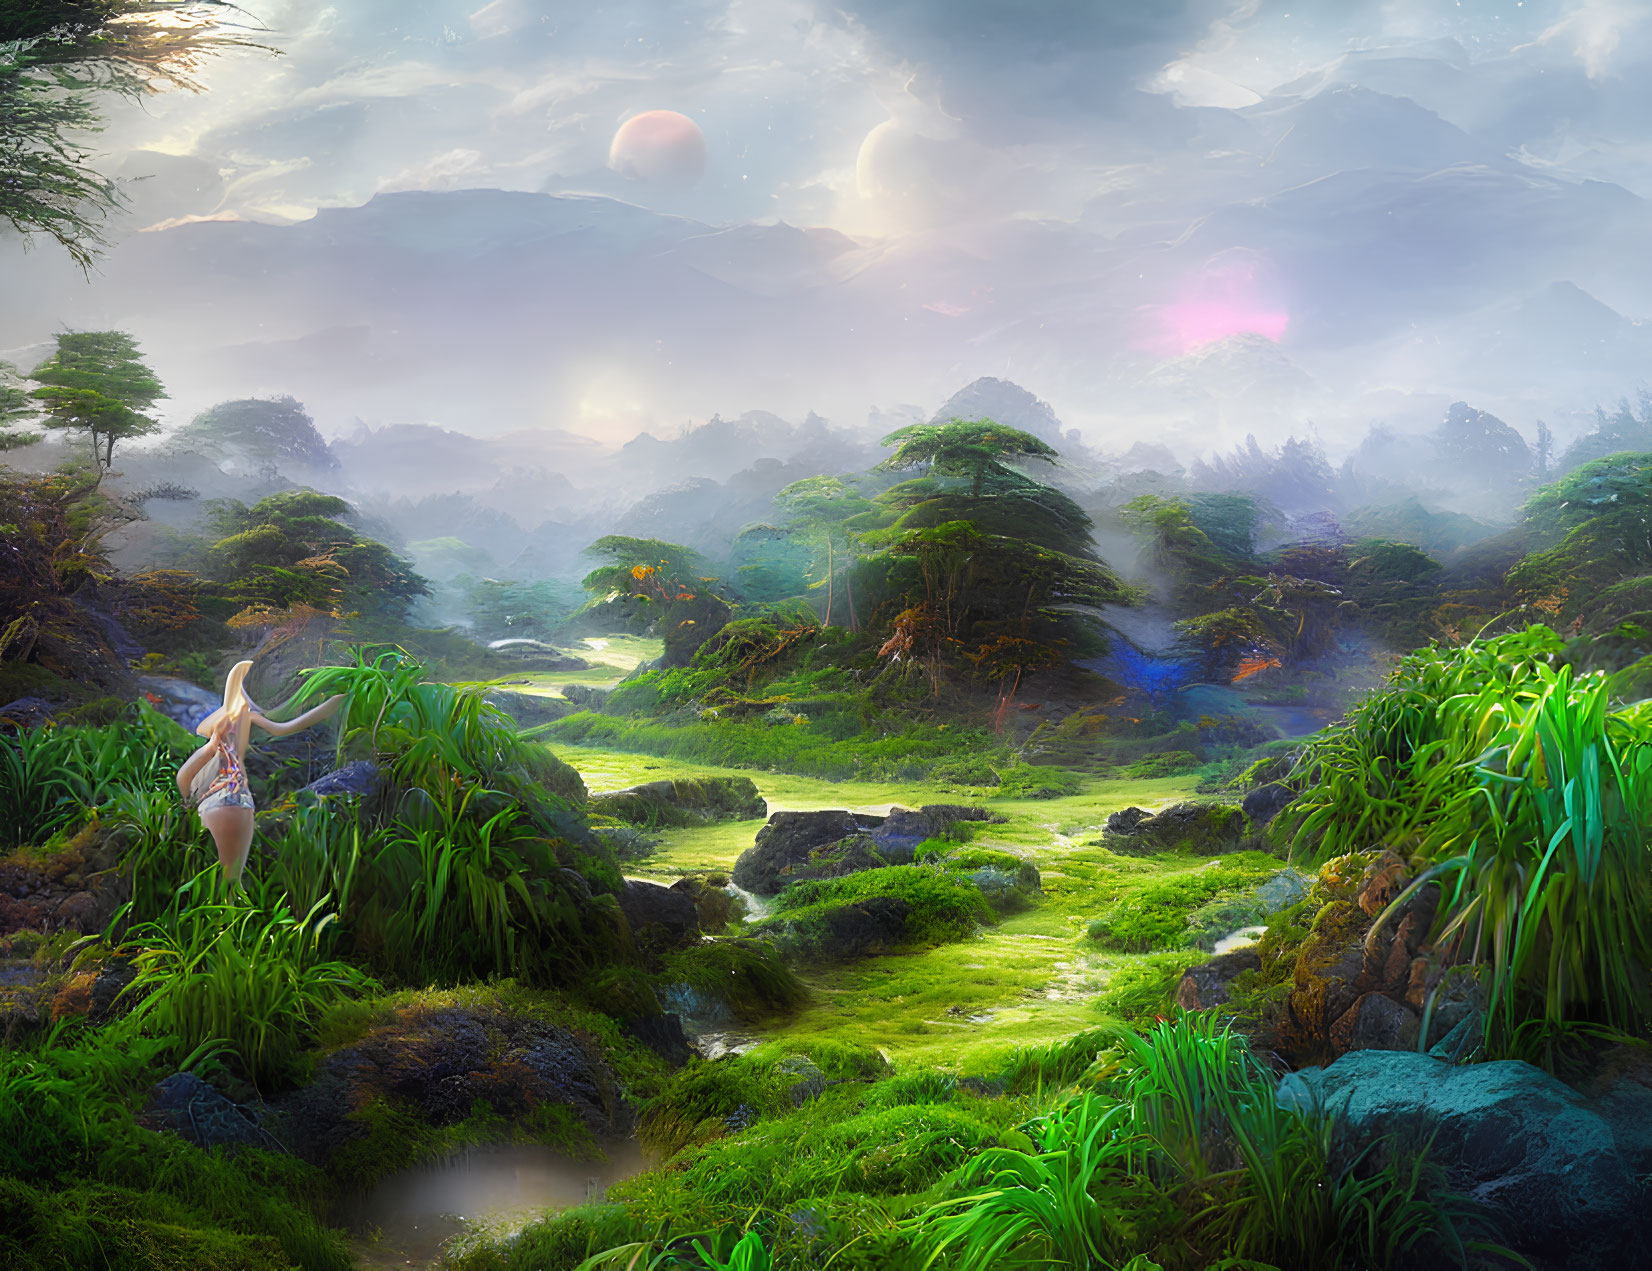 Vibrant greenery, meandering path, mystical orbs, and ethereal figure in lush landscape